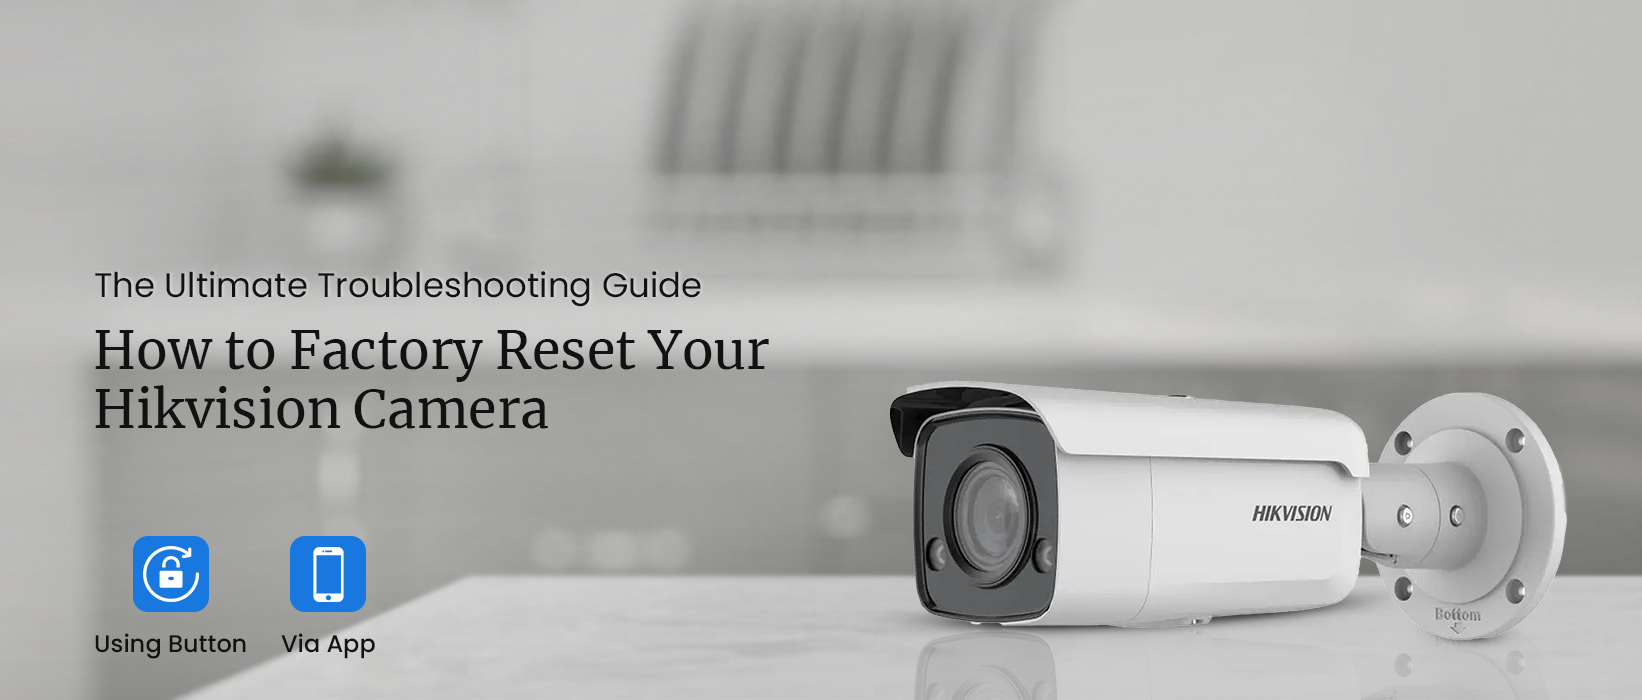 How to Factory Reset Hikvision Camera